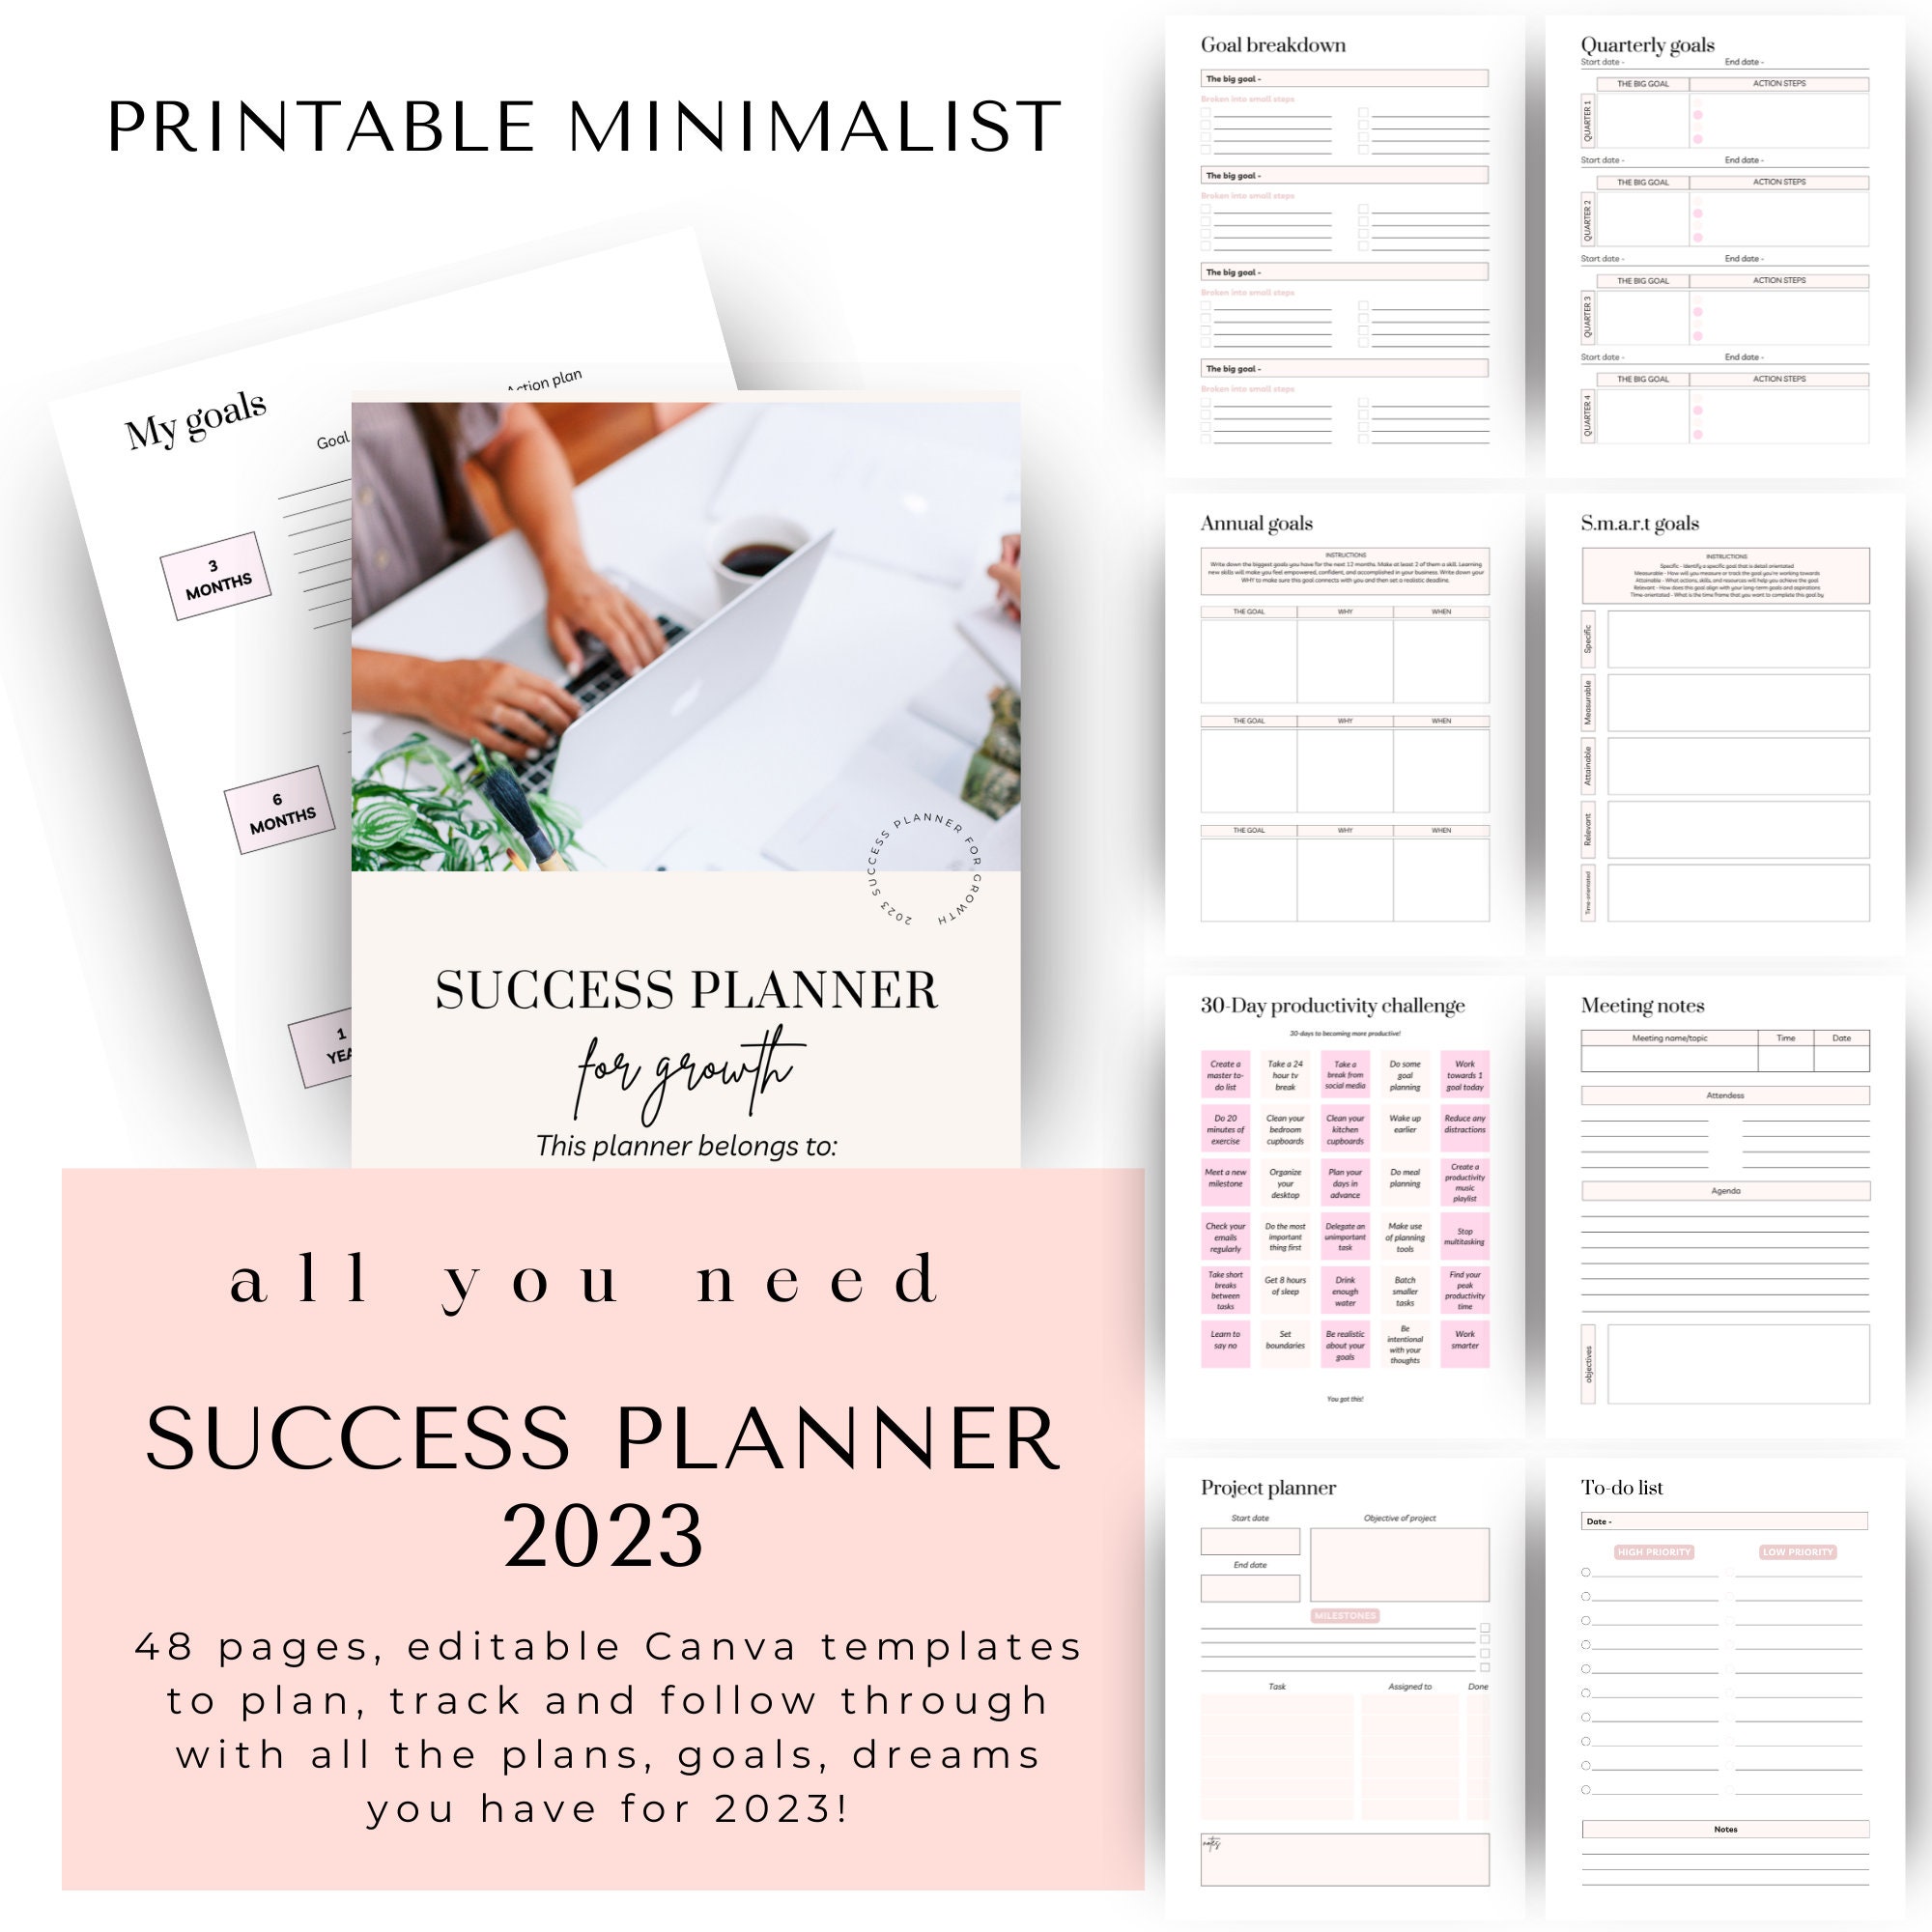 Productivity Planner - Plans, dreams and many challenges